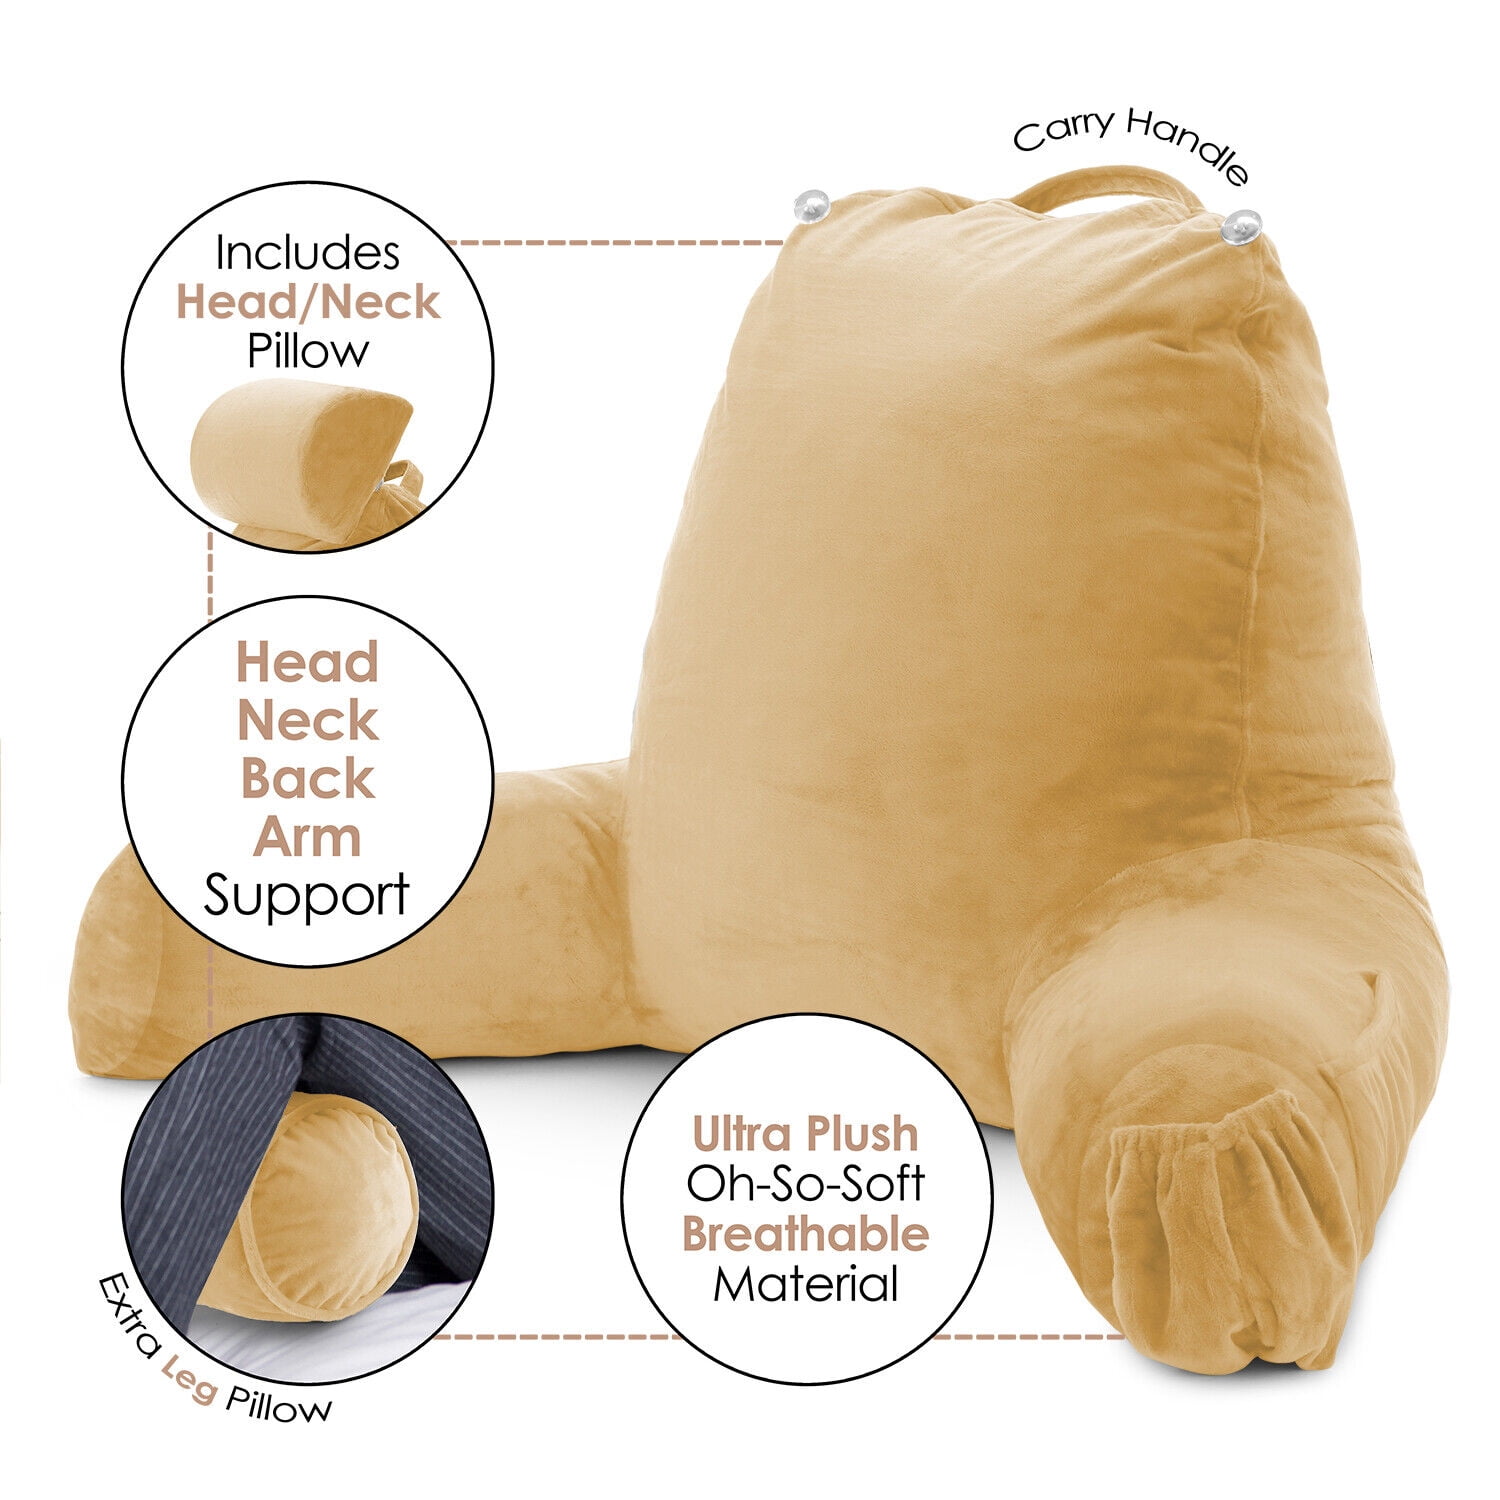 Reading TV Relax Pillow for Bed Rest Arm Pregnancy Lumbar Back